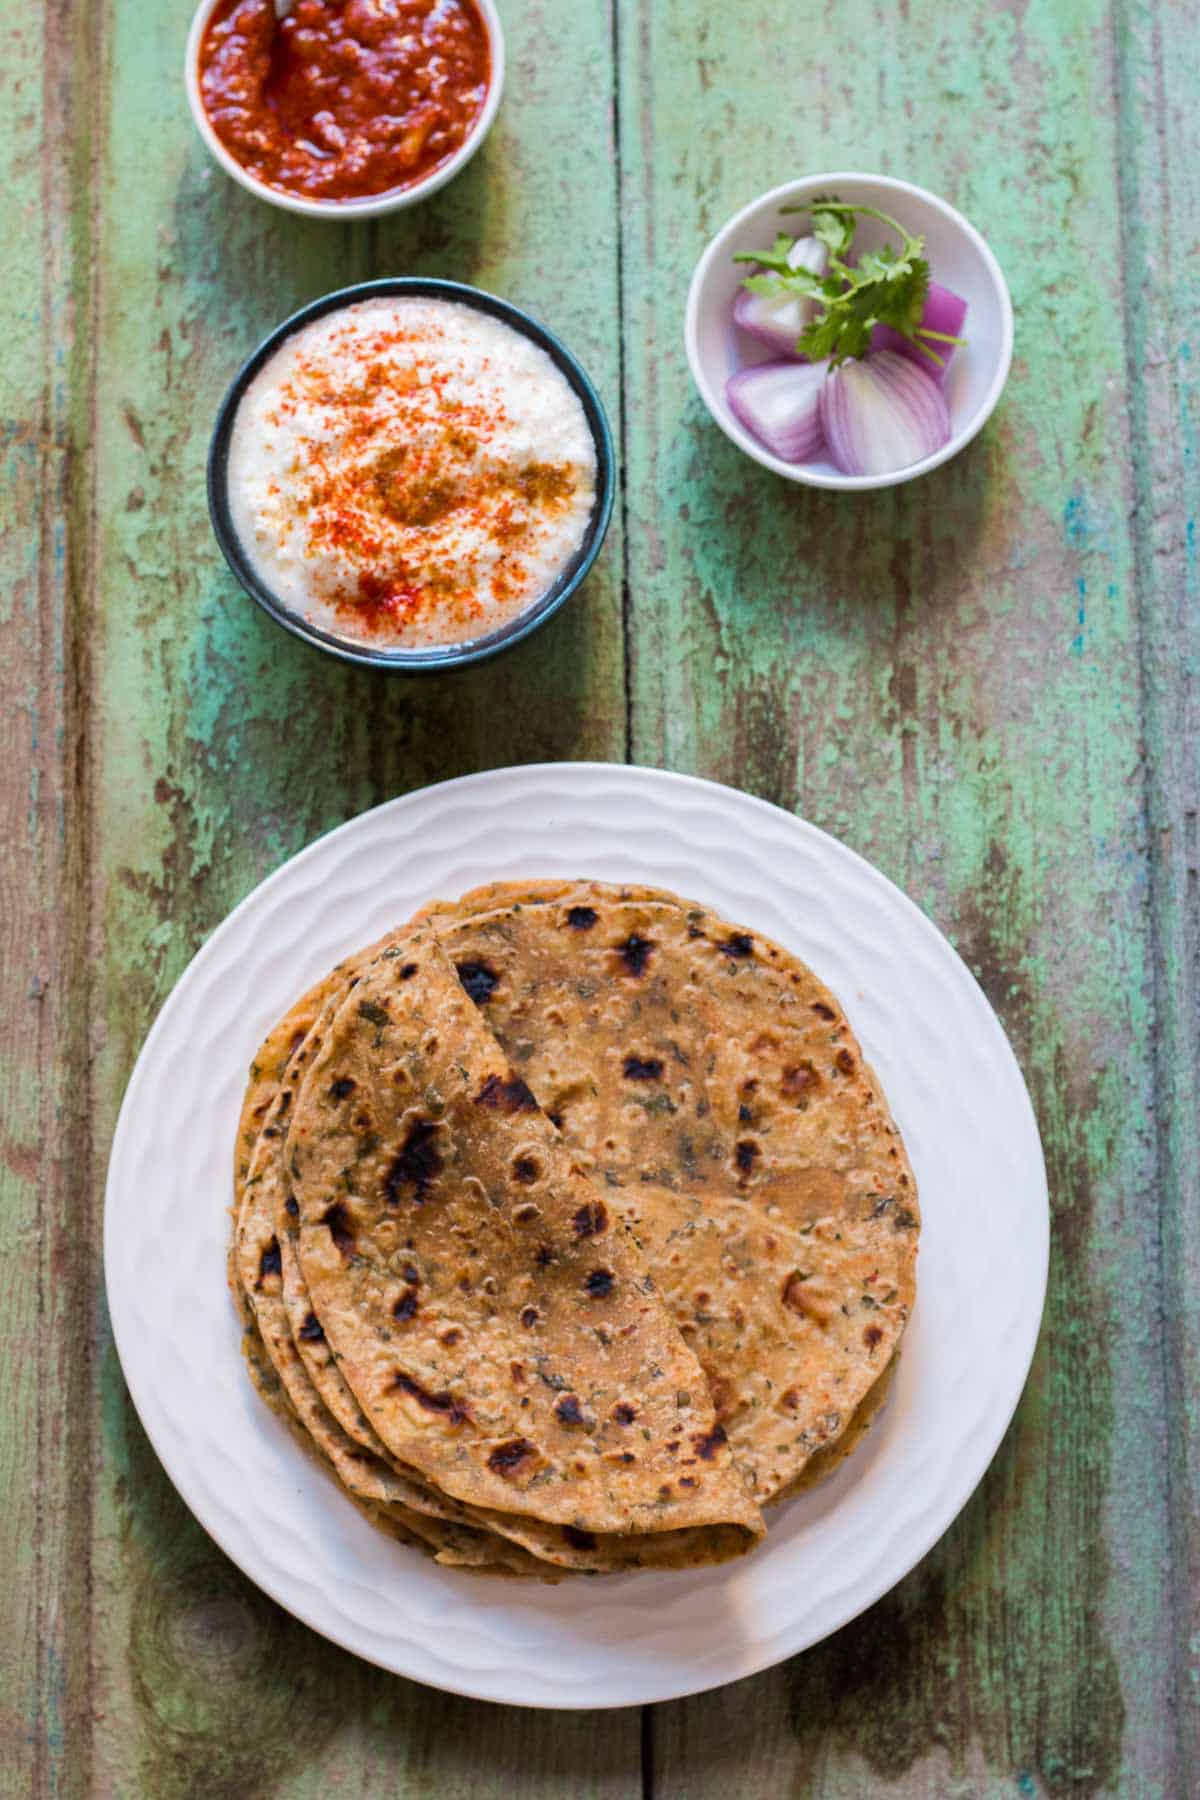 Kasuri Methi Parathas served with flavored curds, onions and some good ol' pickle!